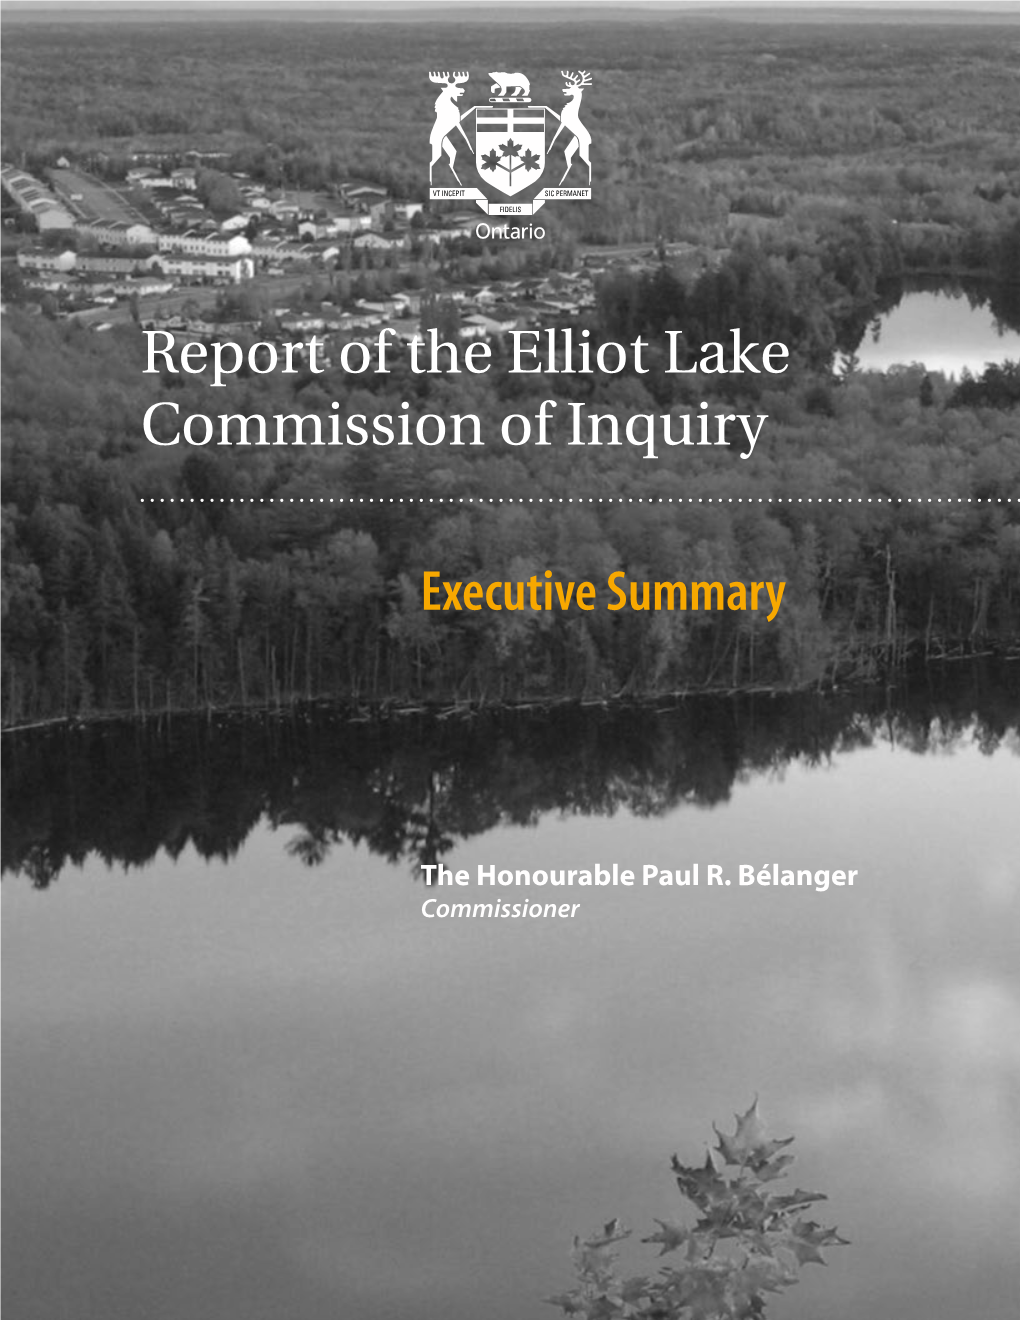 Report of the Elliot Lake Commission of Inquiry